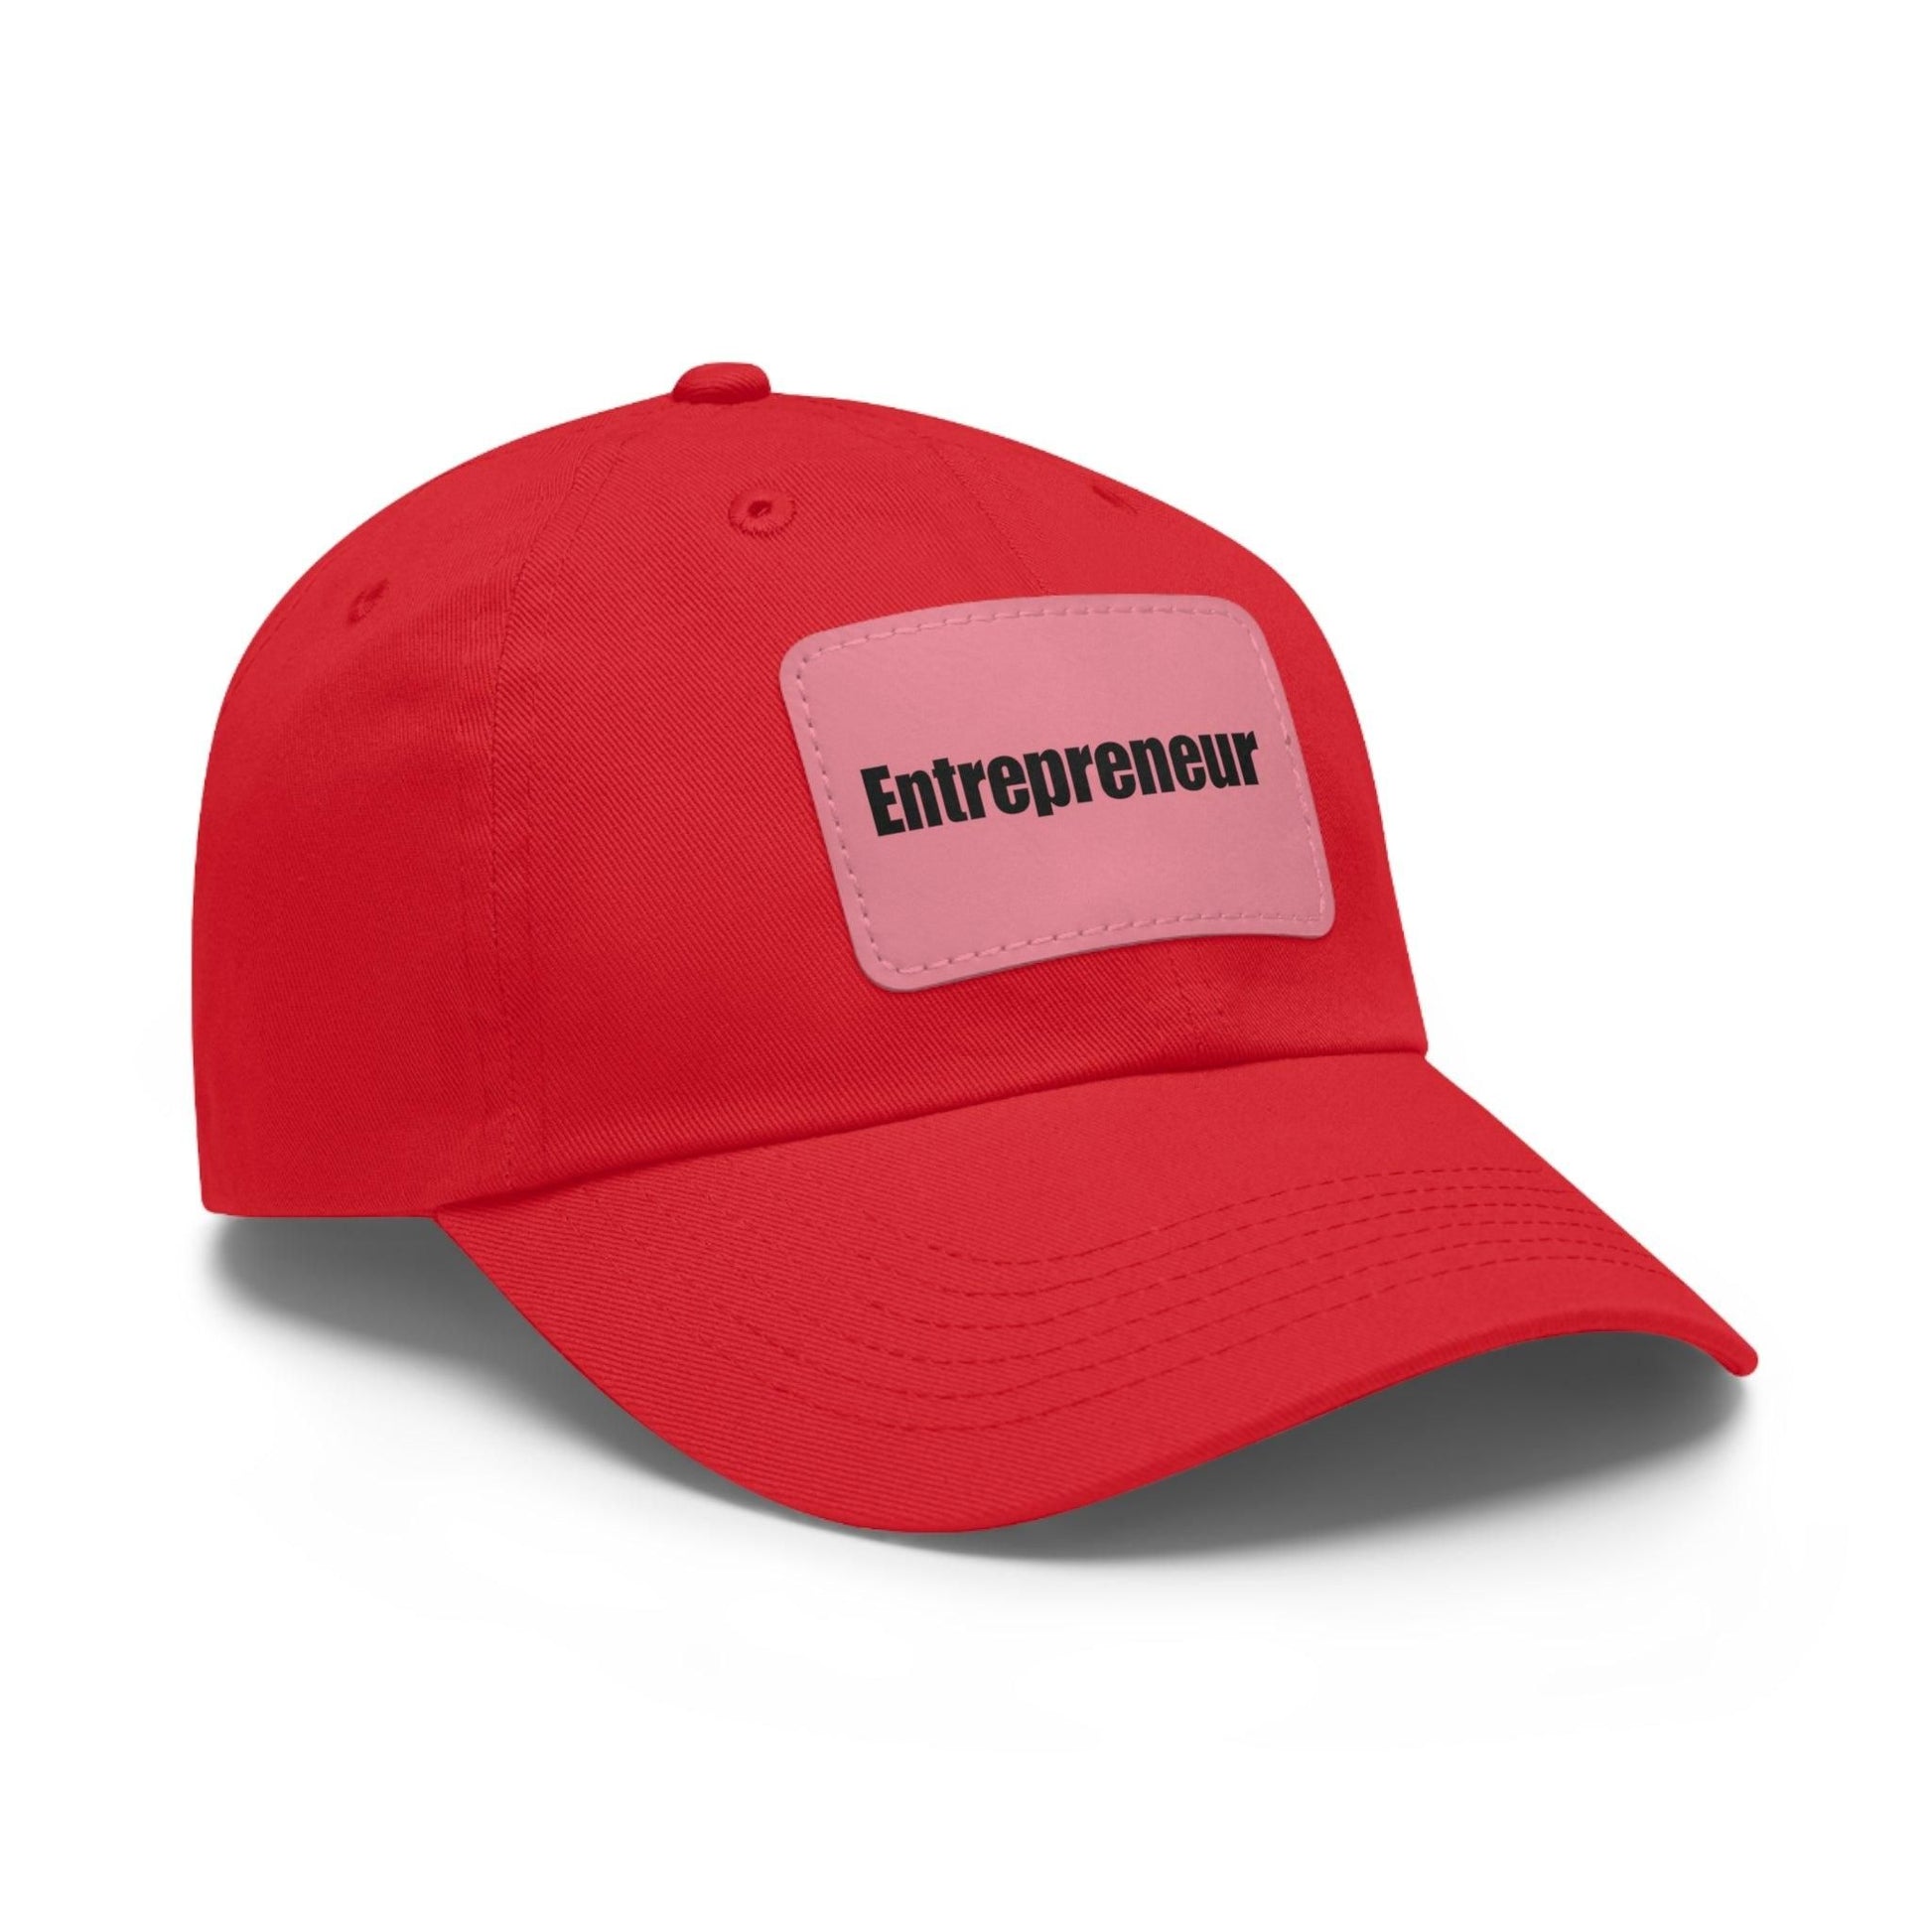 Entrepreneur Baseball Hat with Leather Patch Cap   